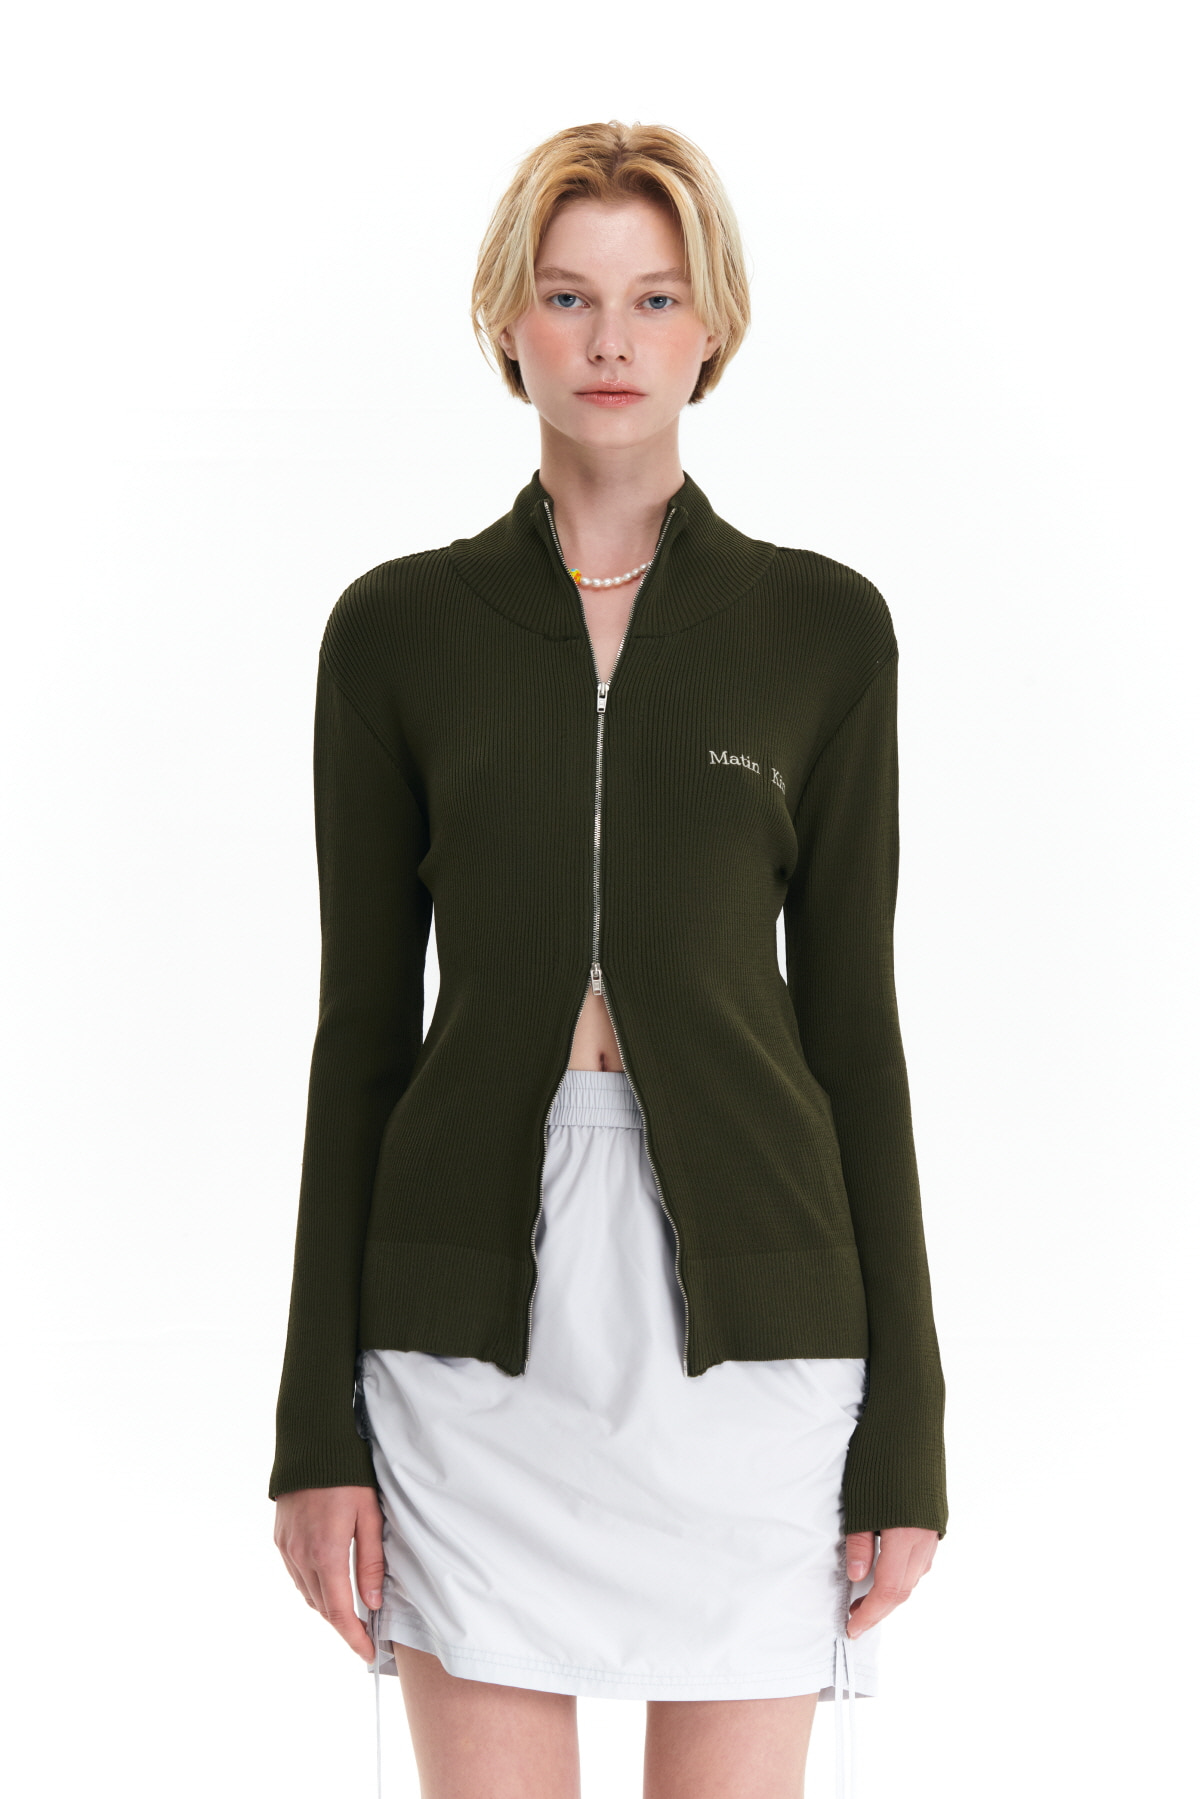 FITTED ZIP UP KNIT CARDIGAN IN KHAKI